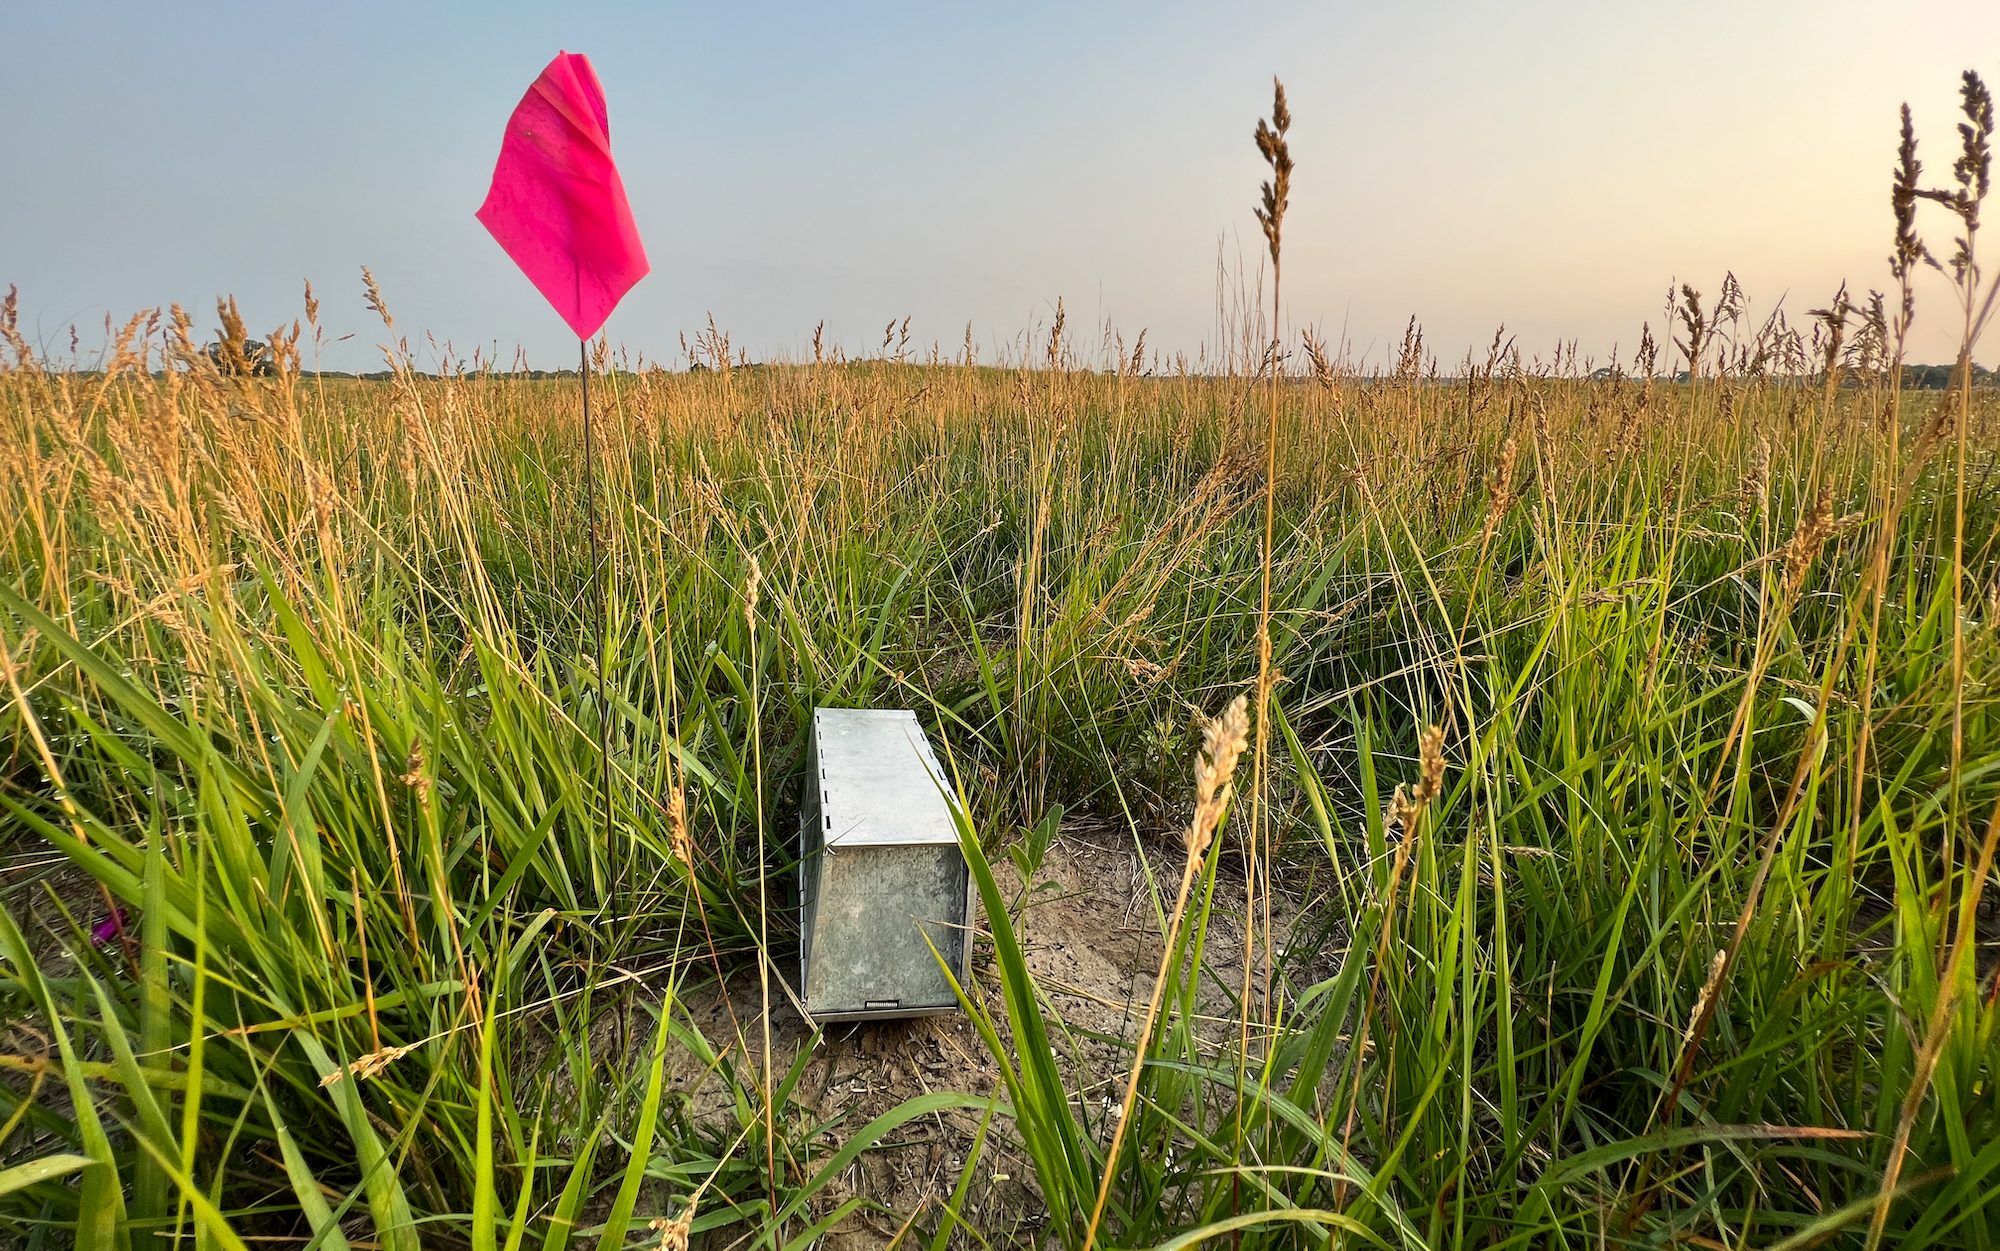 small metal box and a pink flag in the grass